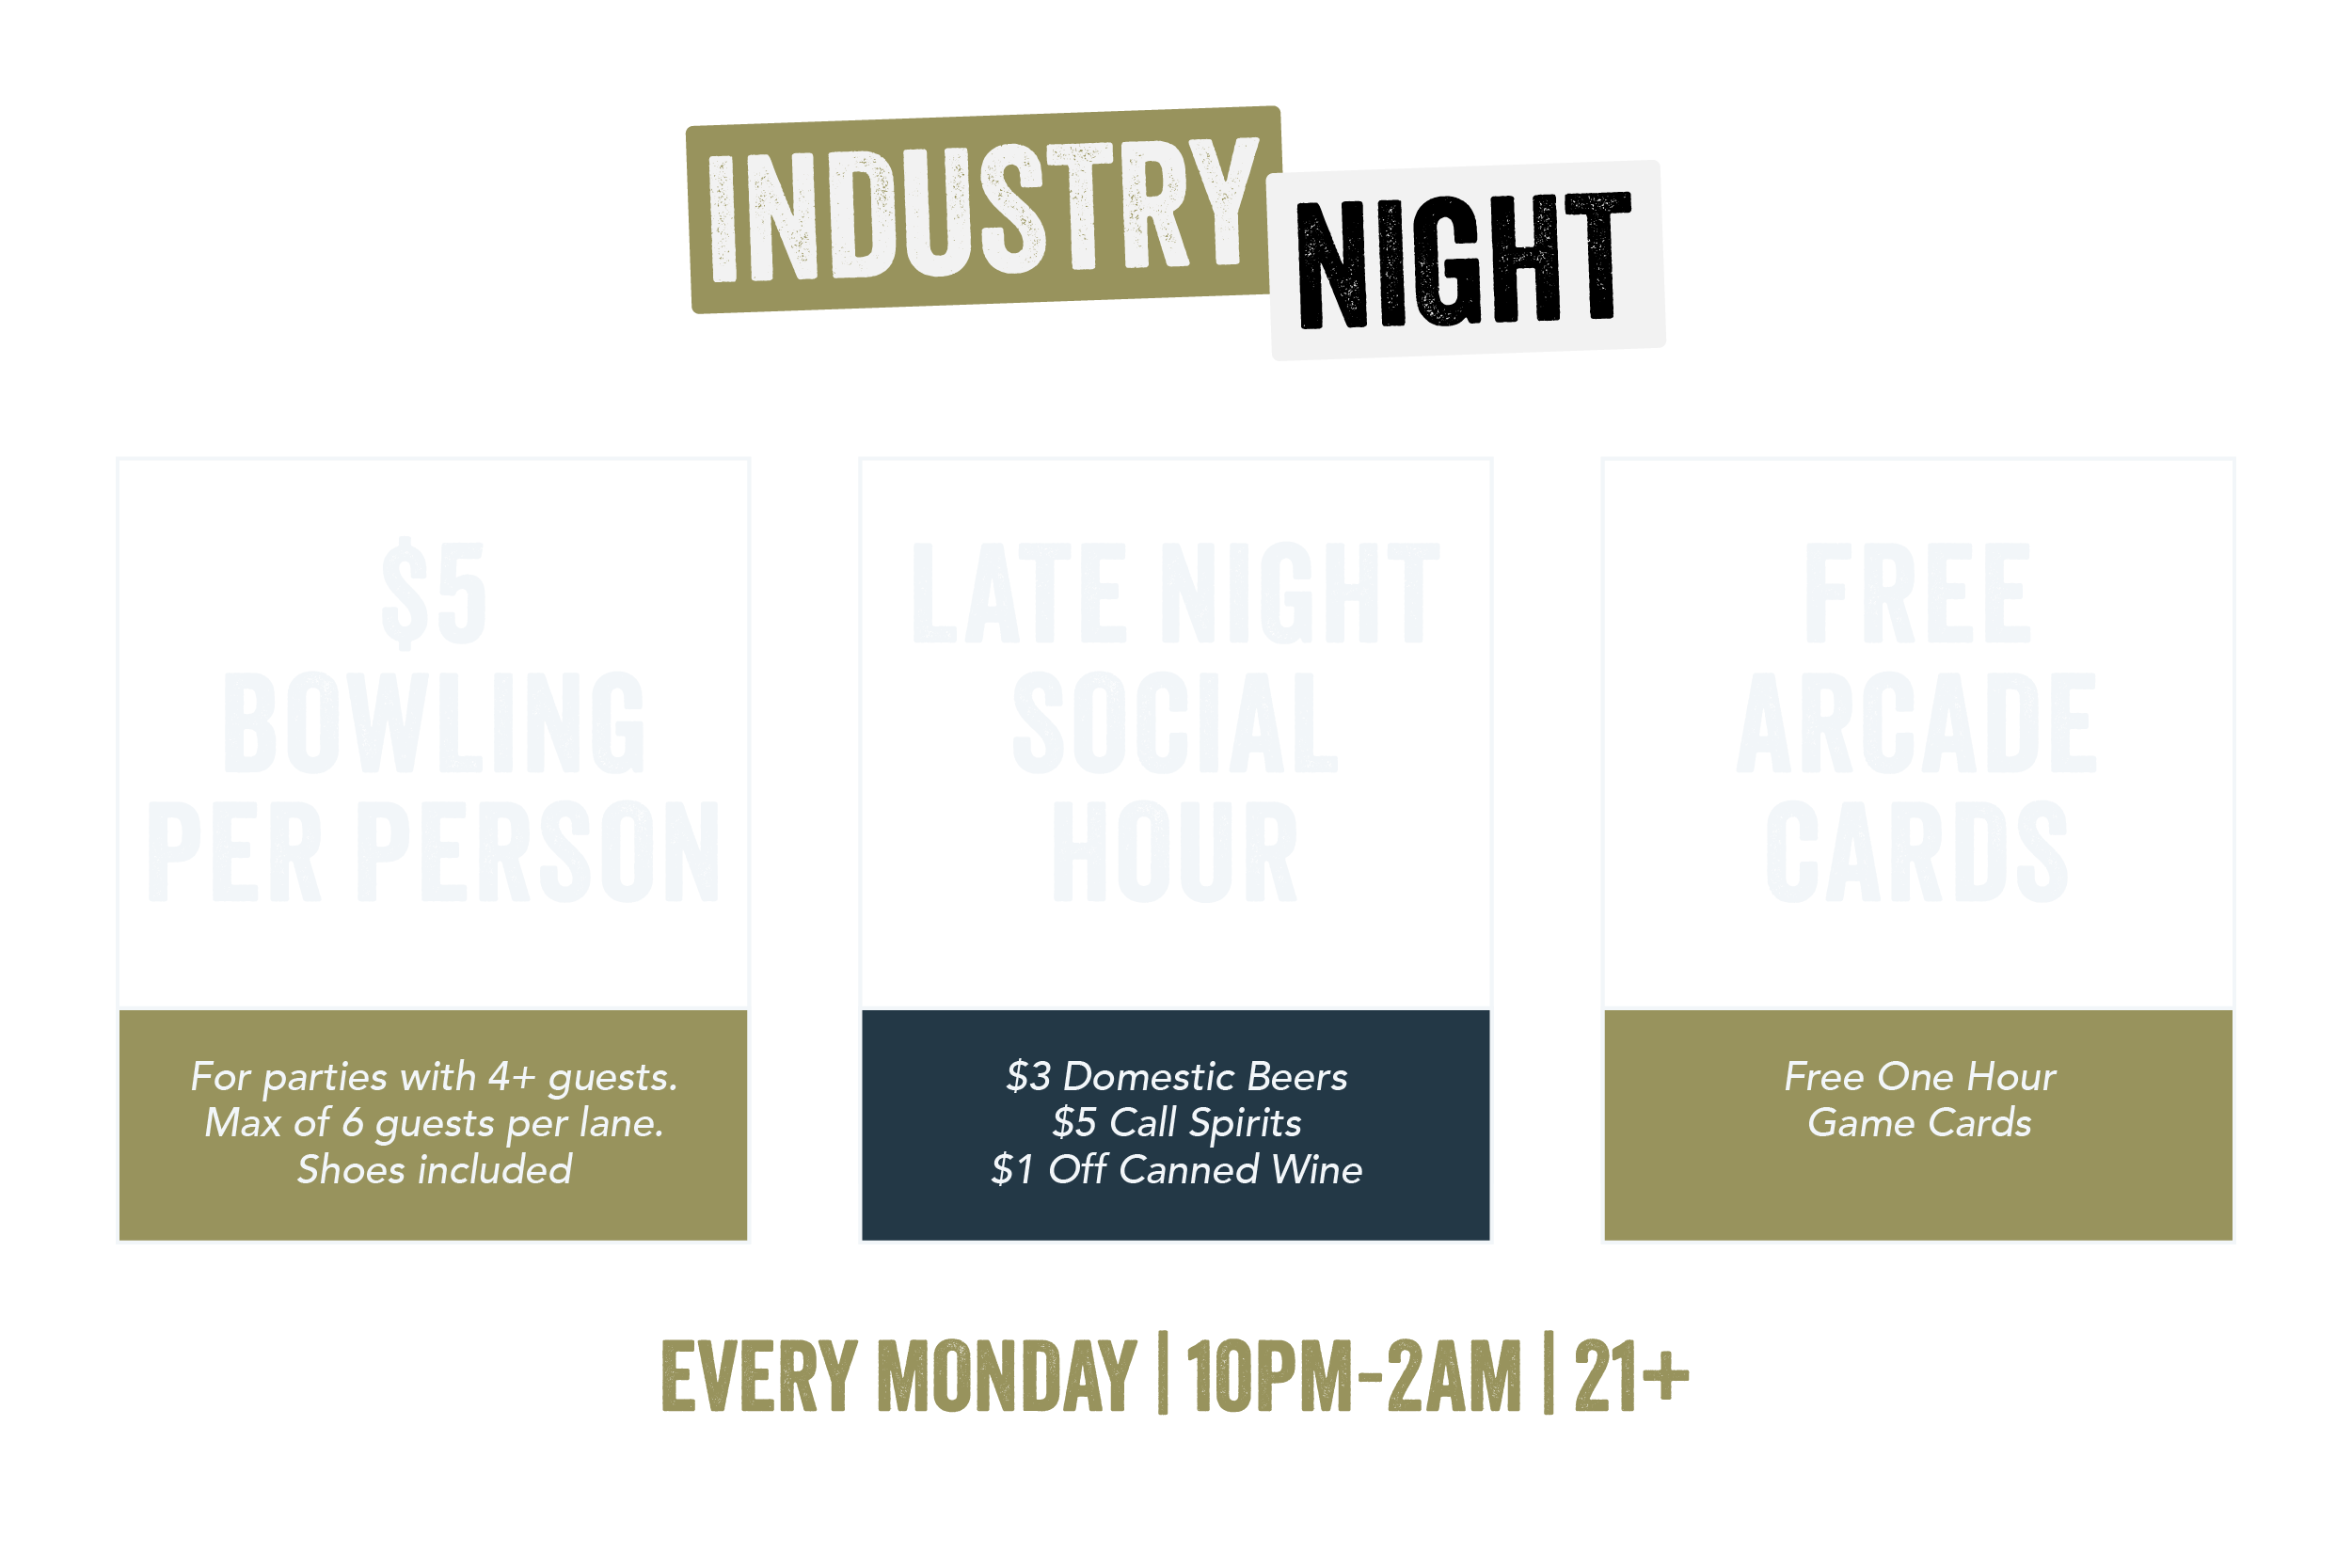 $5 Bowling Per Person (For parties with 4+ guests | Max 6 guests per lane | Shoes included)| Late Night Social Hour | $3 Domestic Beers, $5 call Spirits, $1 off canned wine | Free Arcade Cards with proof of restaurant/retail job | Every Monday 10PM-2AM, 21+